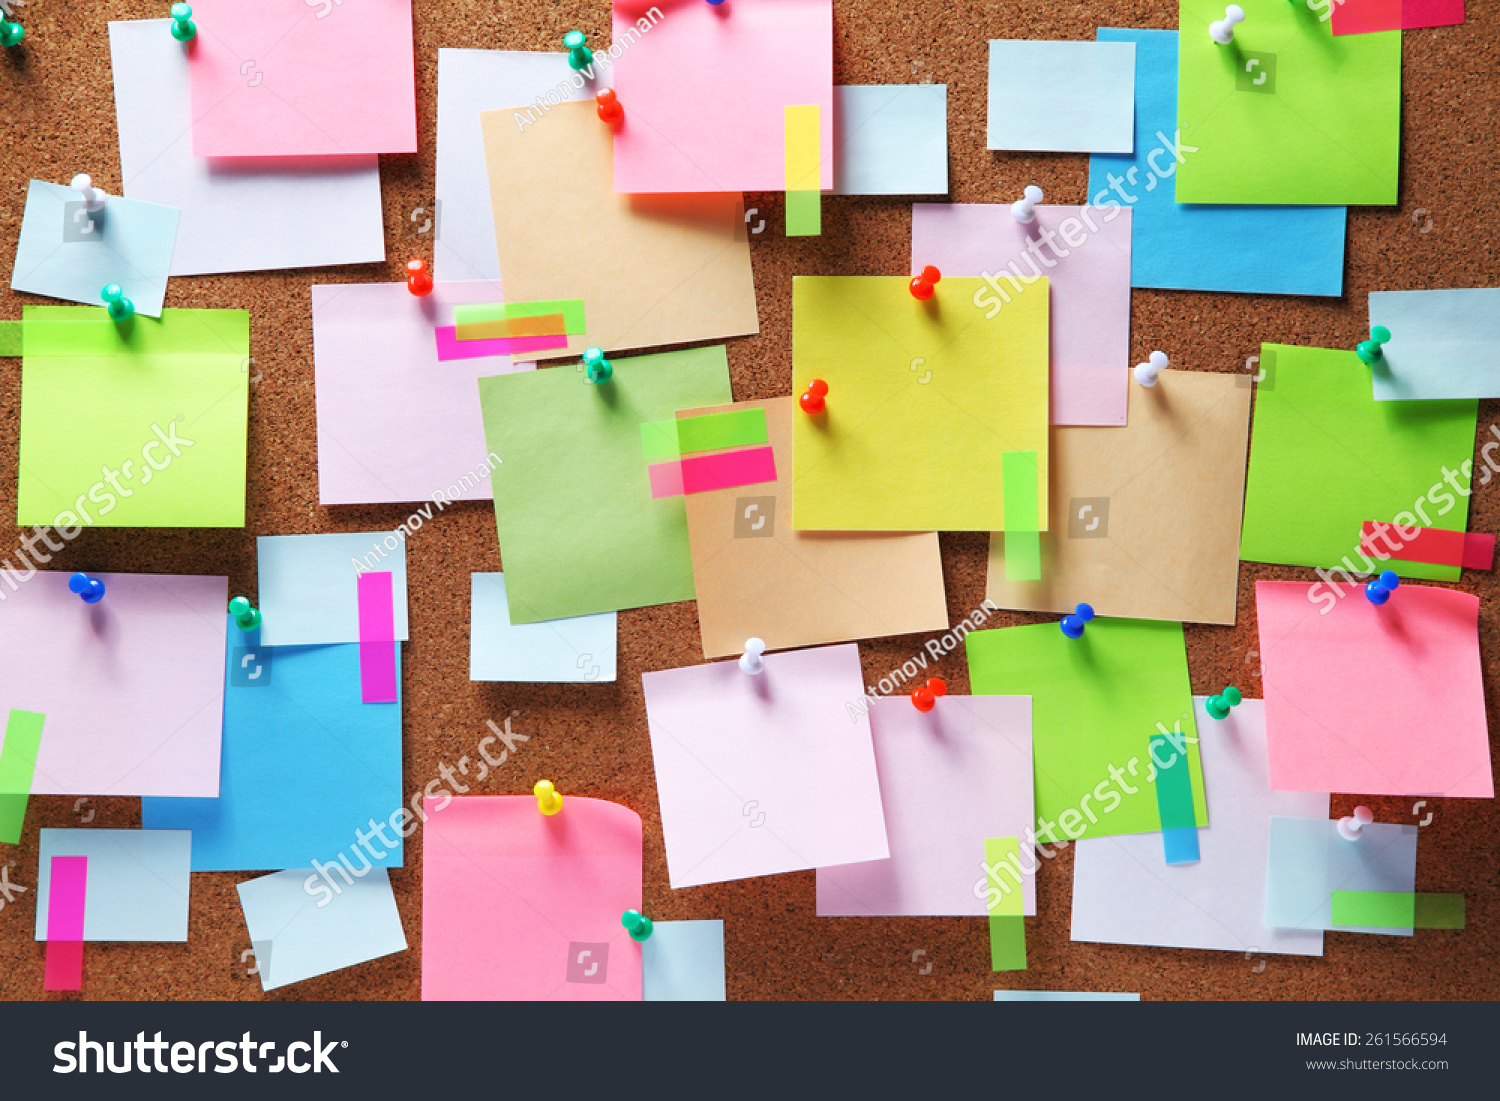 Image of colorful sticky notes on cork bulletin board #261566594